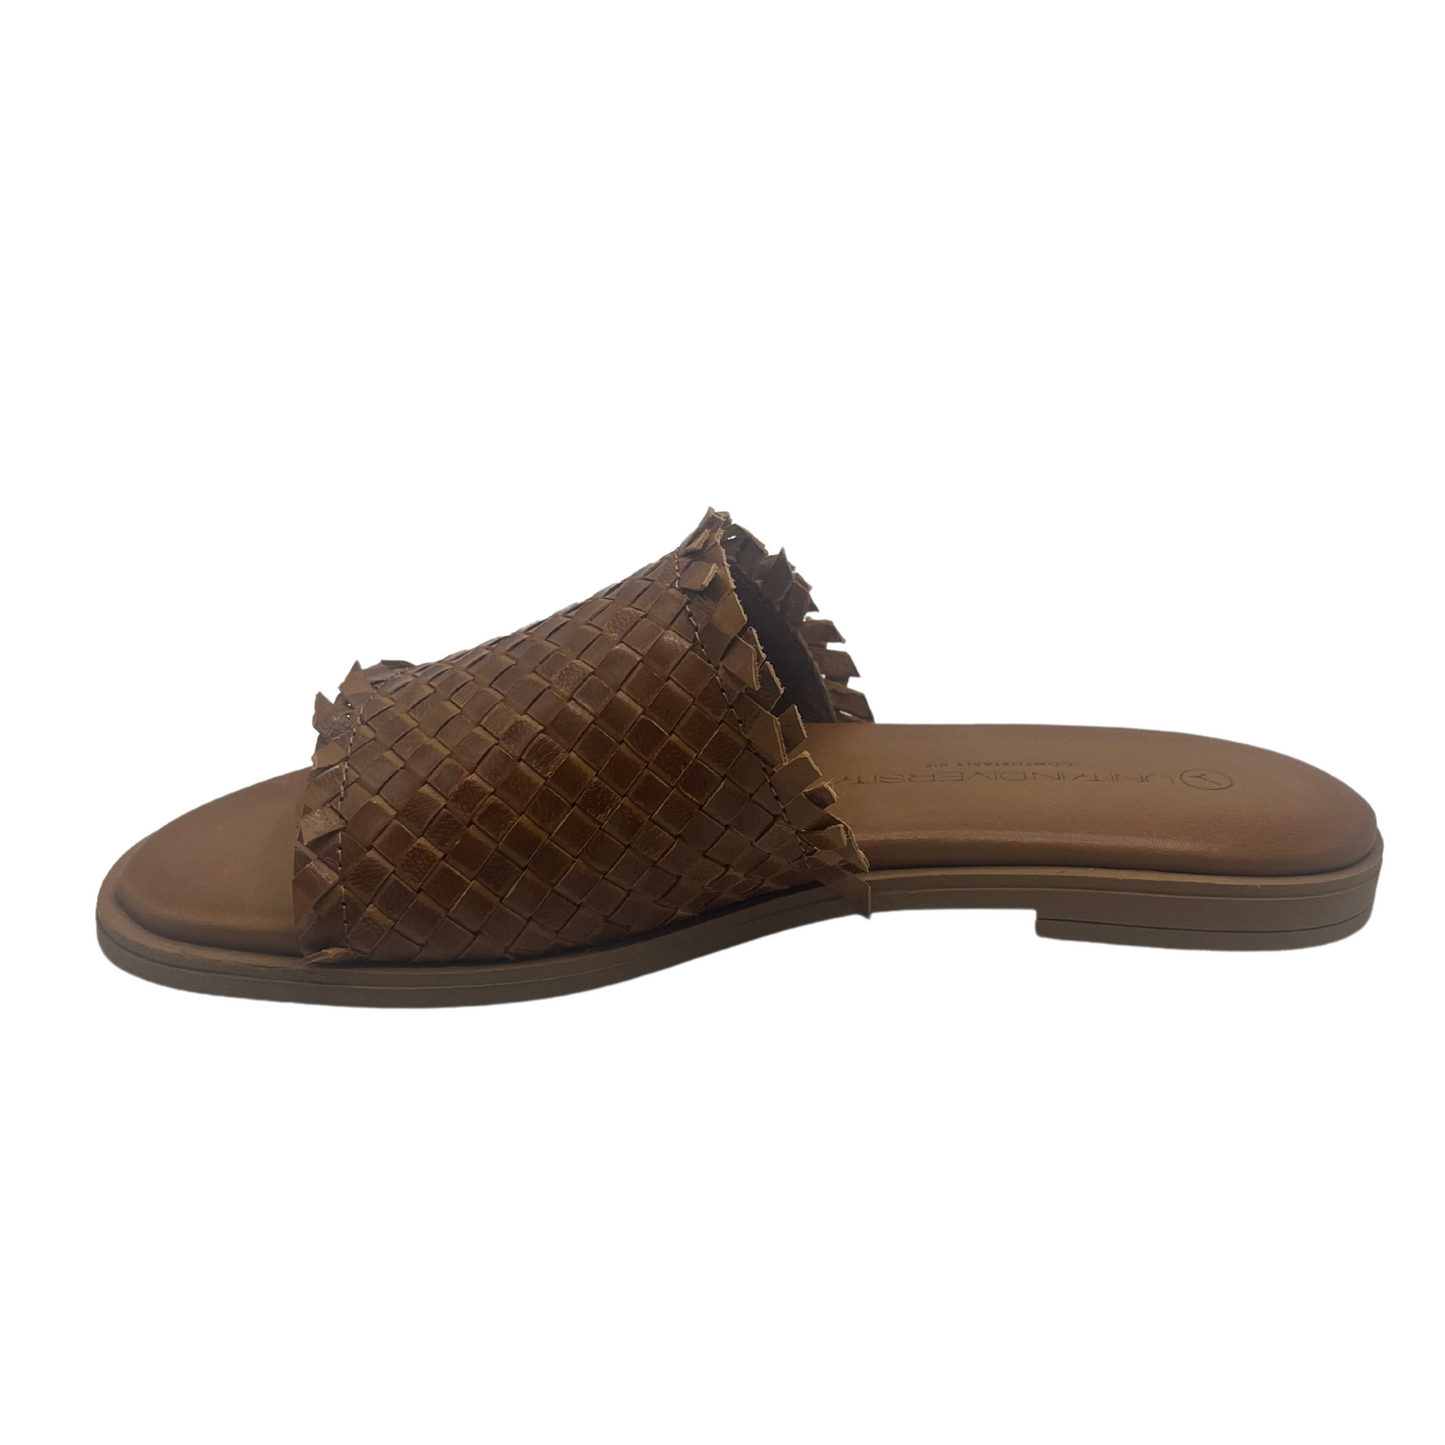 Left facing view of brown woven leather slip on sandals with brown leather footbed and low heel